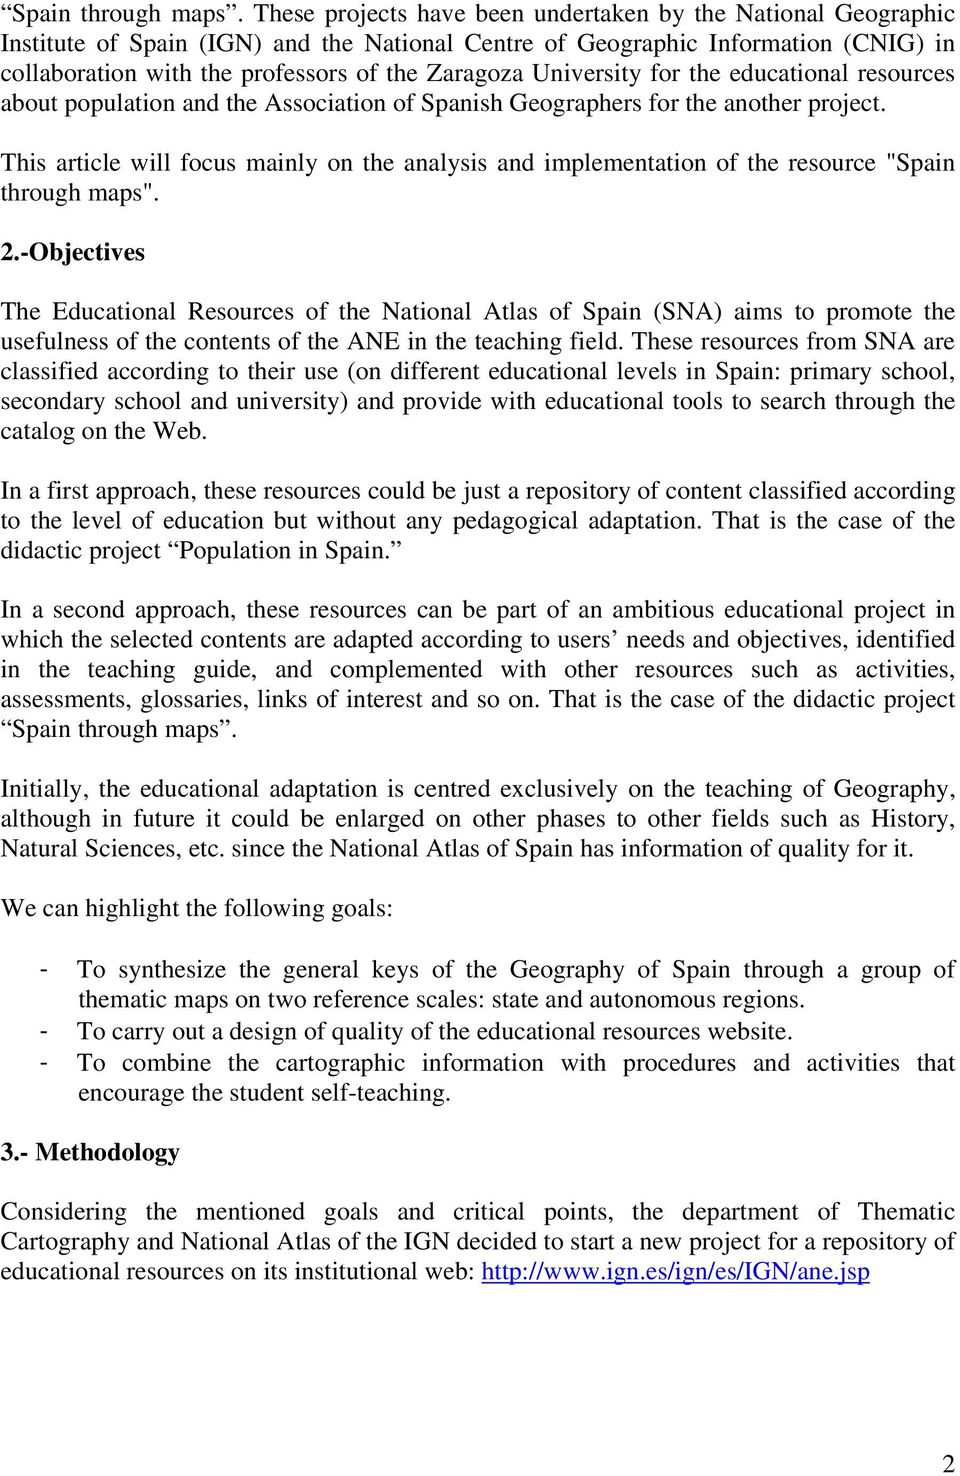 University for the educational resources about population and the Association of Spanish Geographers for the another project.